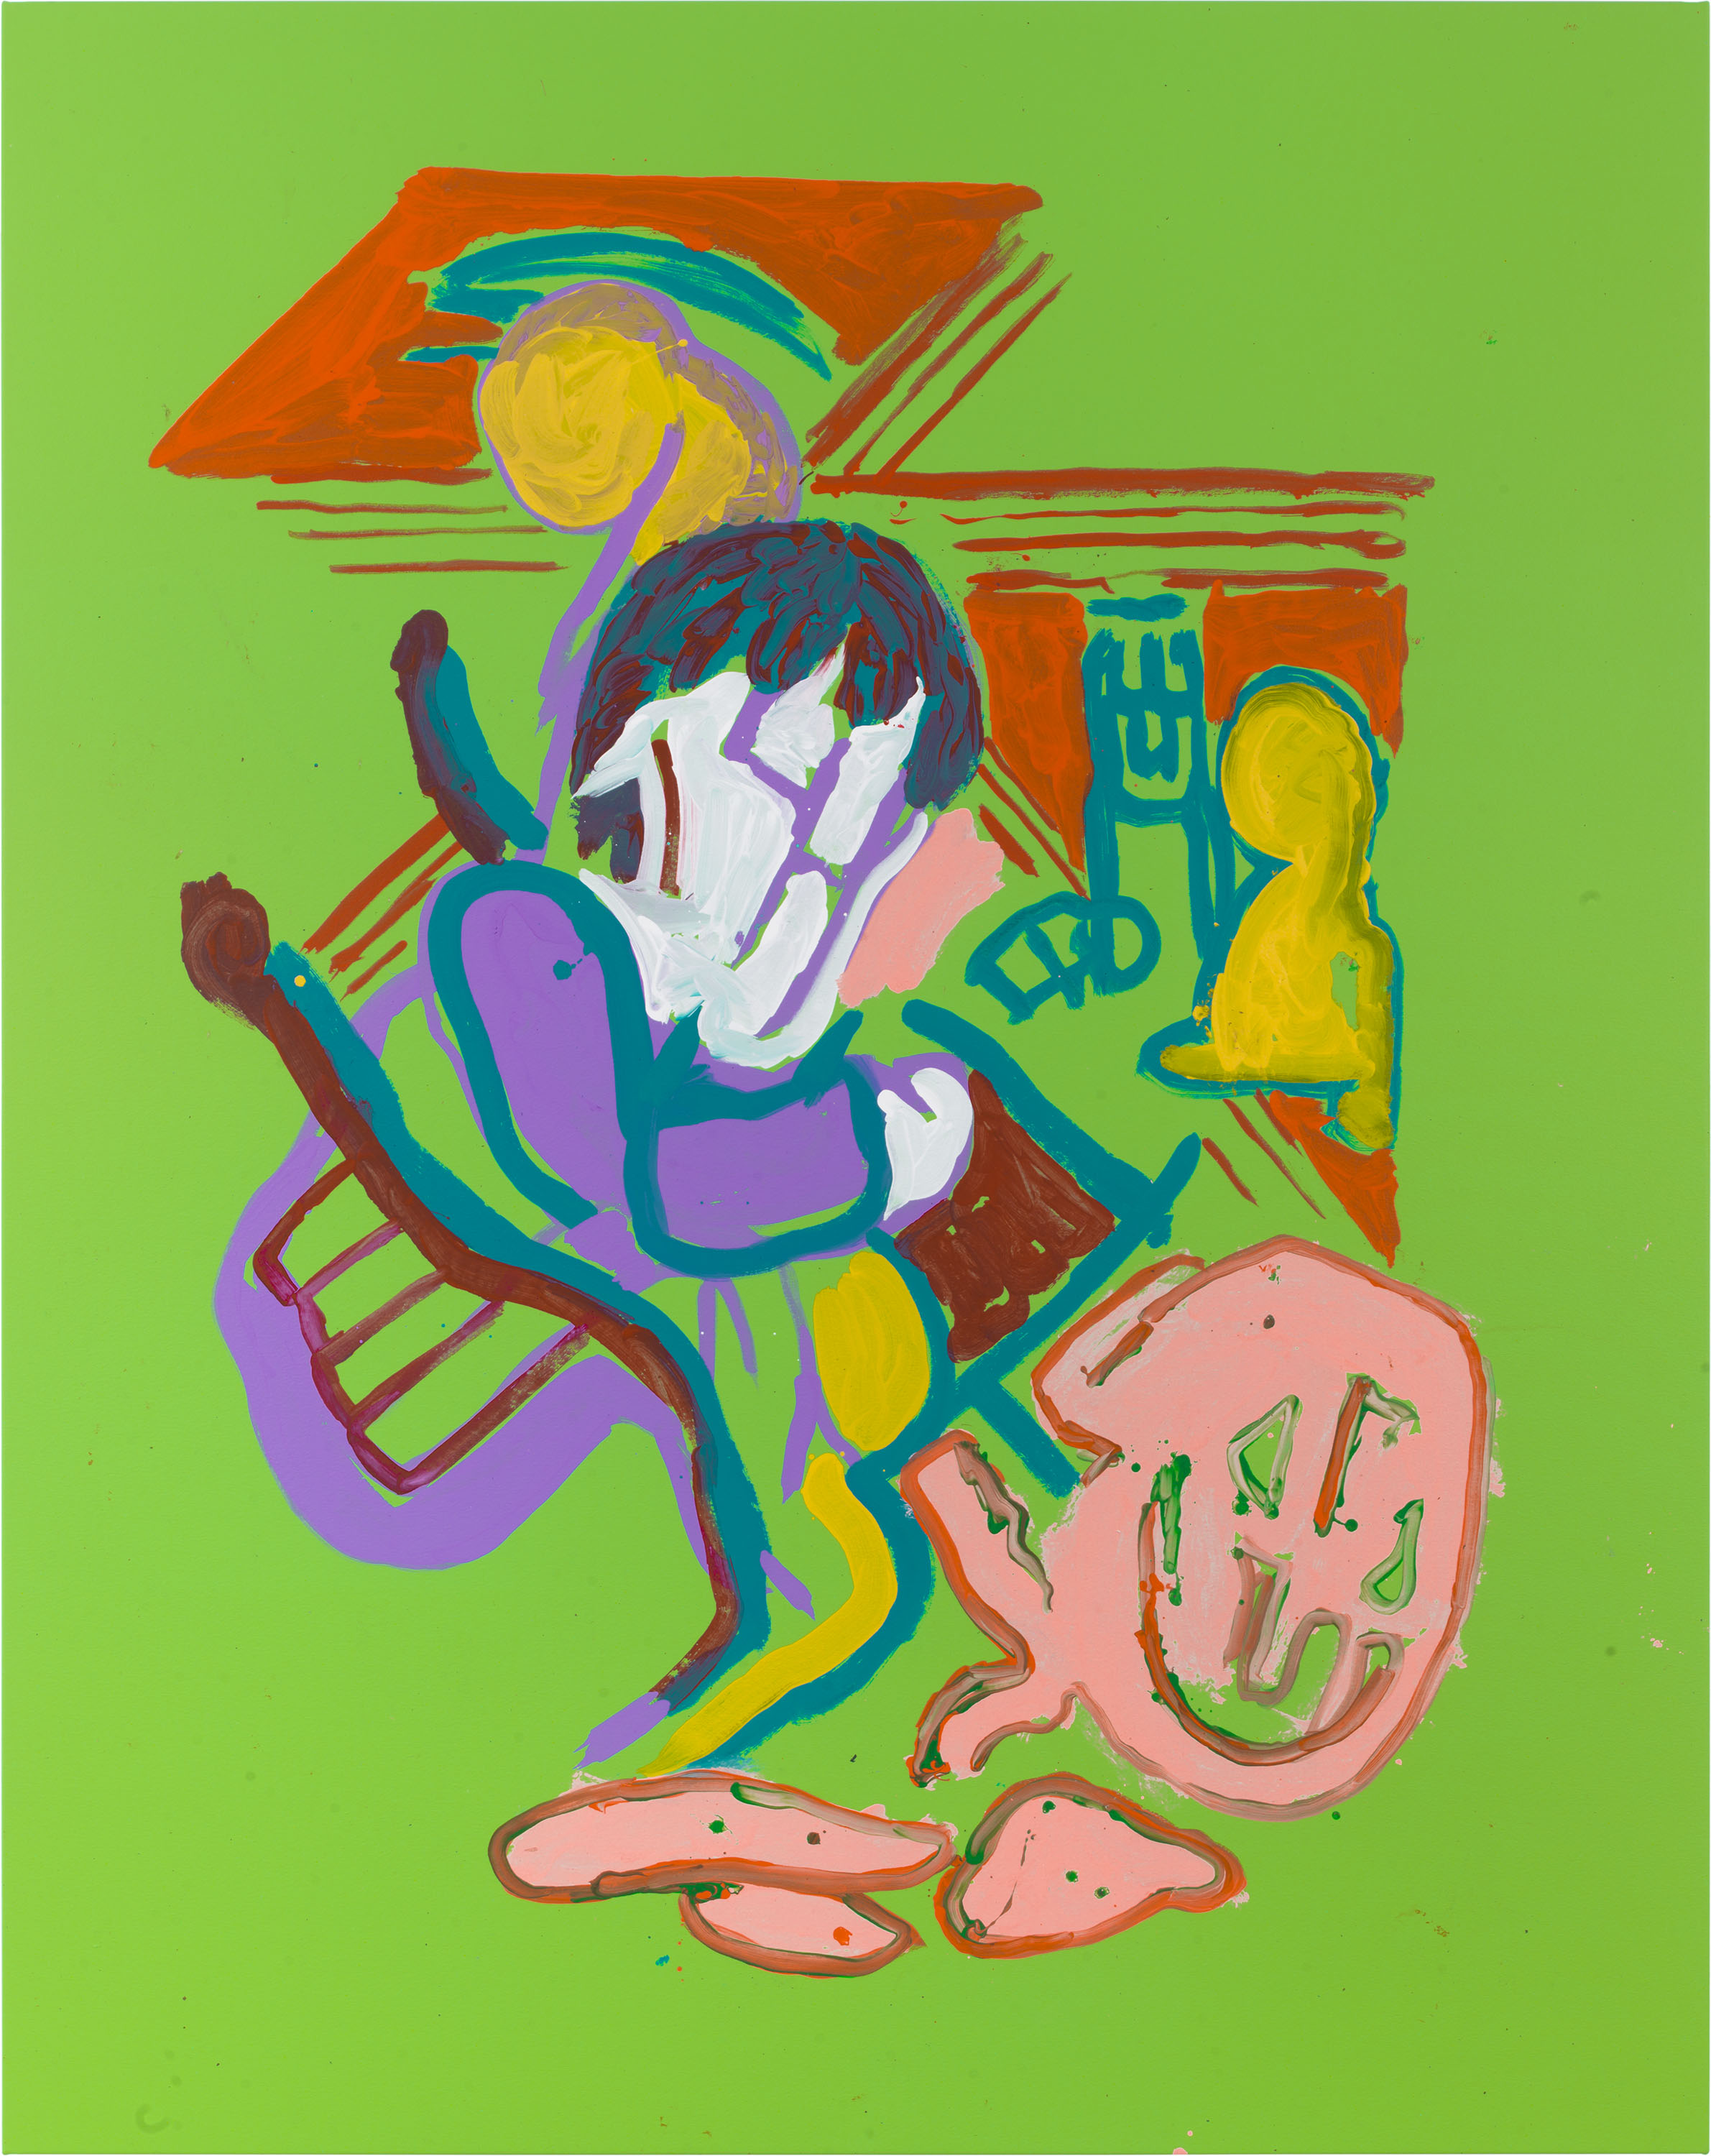  Drew Beattie  People on Green   2018 acrylic on canvas 96 x 76 inches 